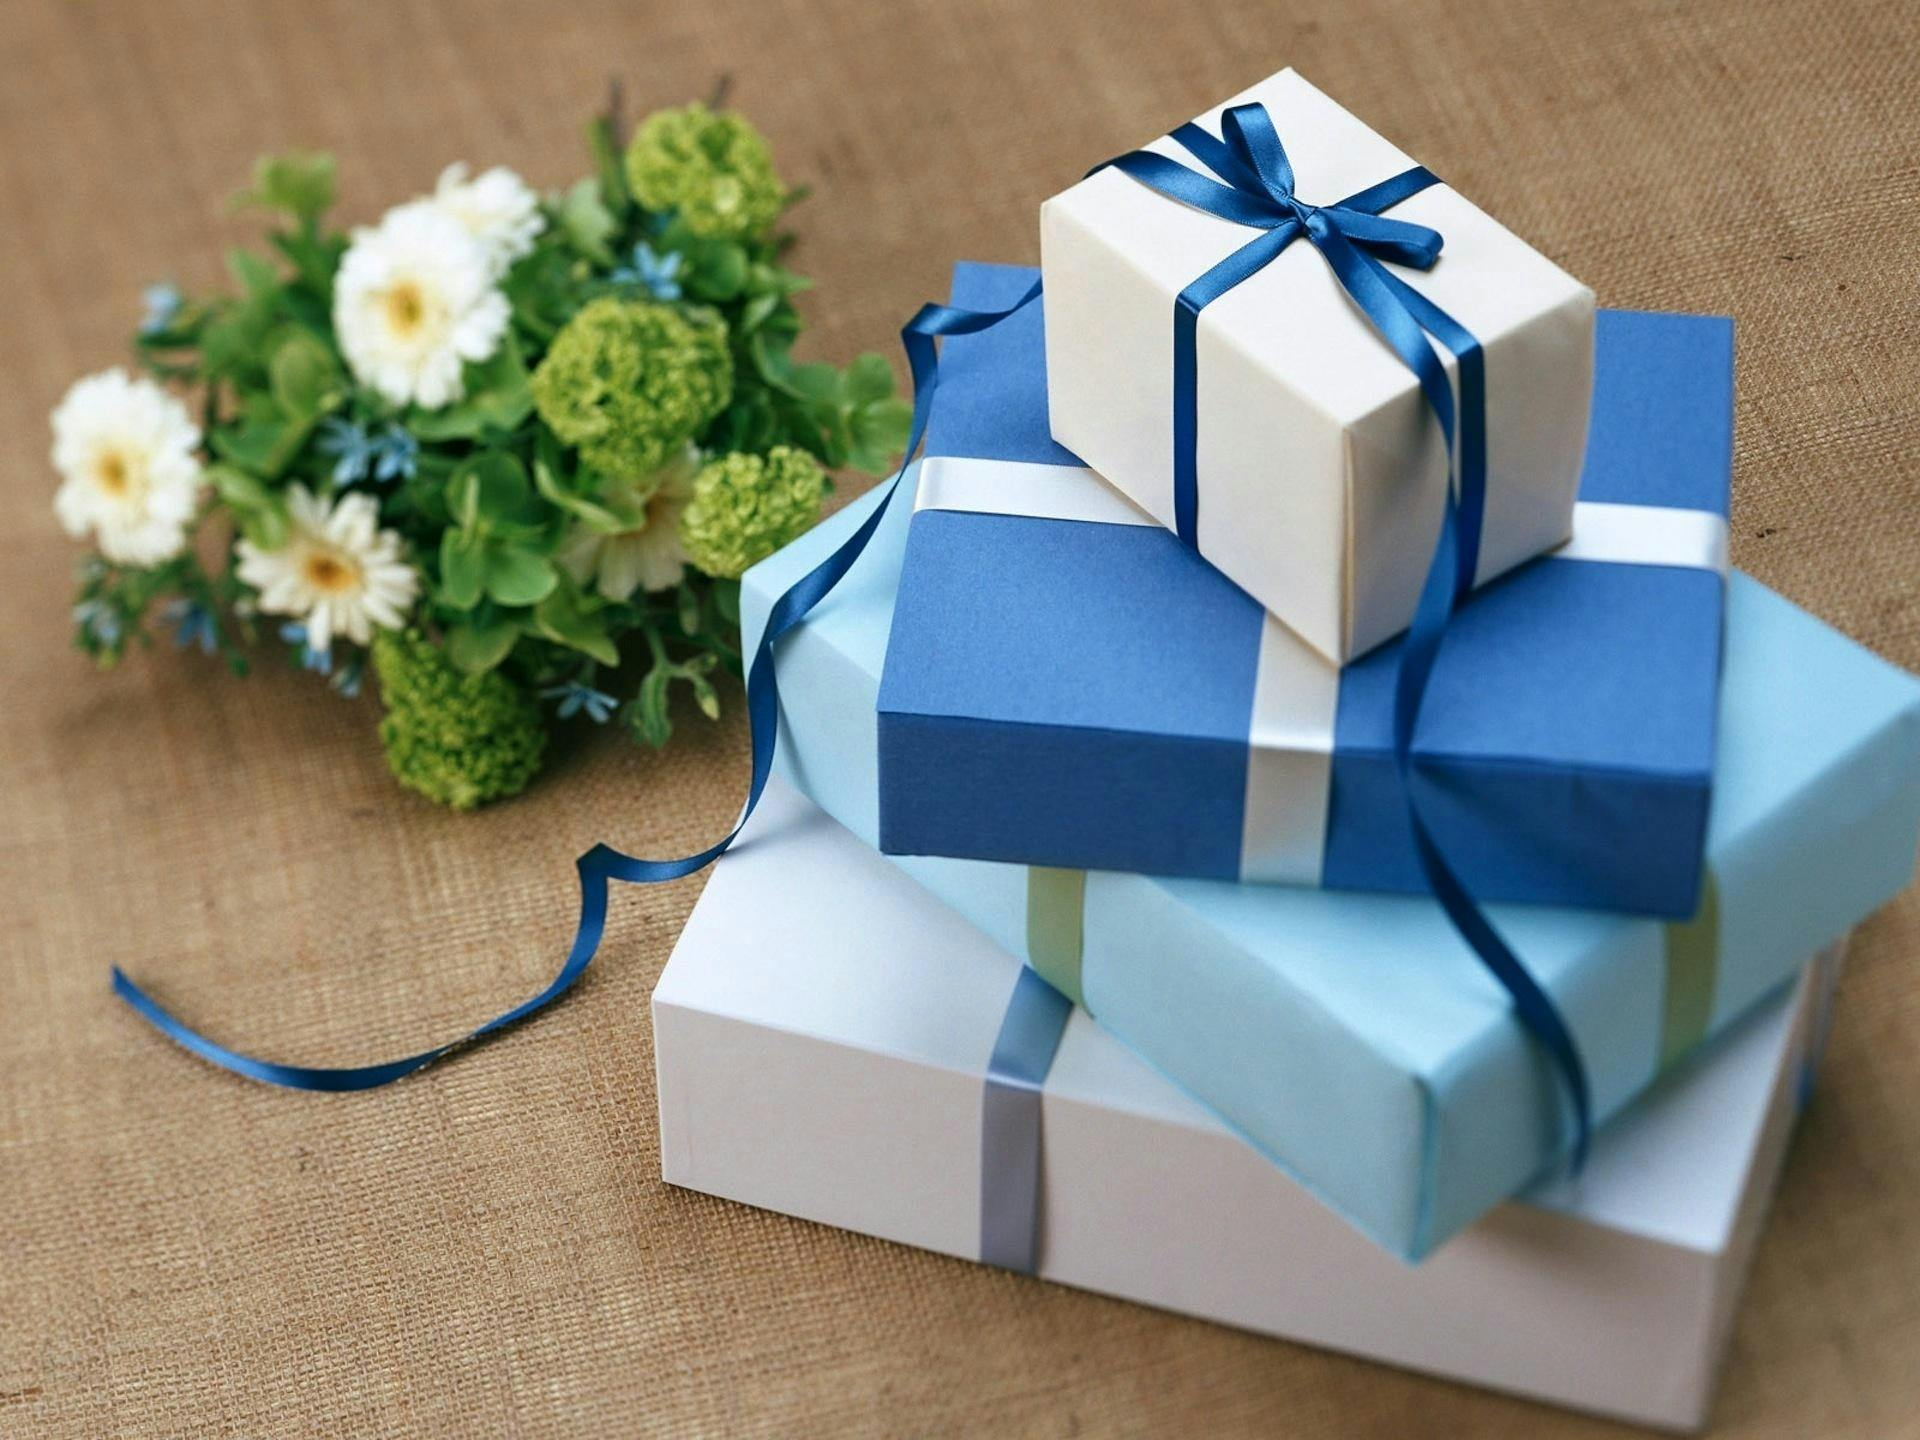 Stacked gift boxes | Source: Pexels